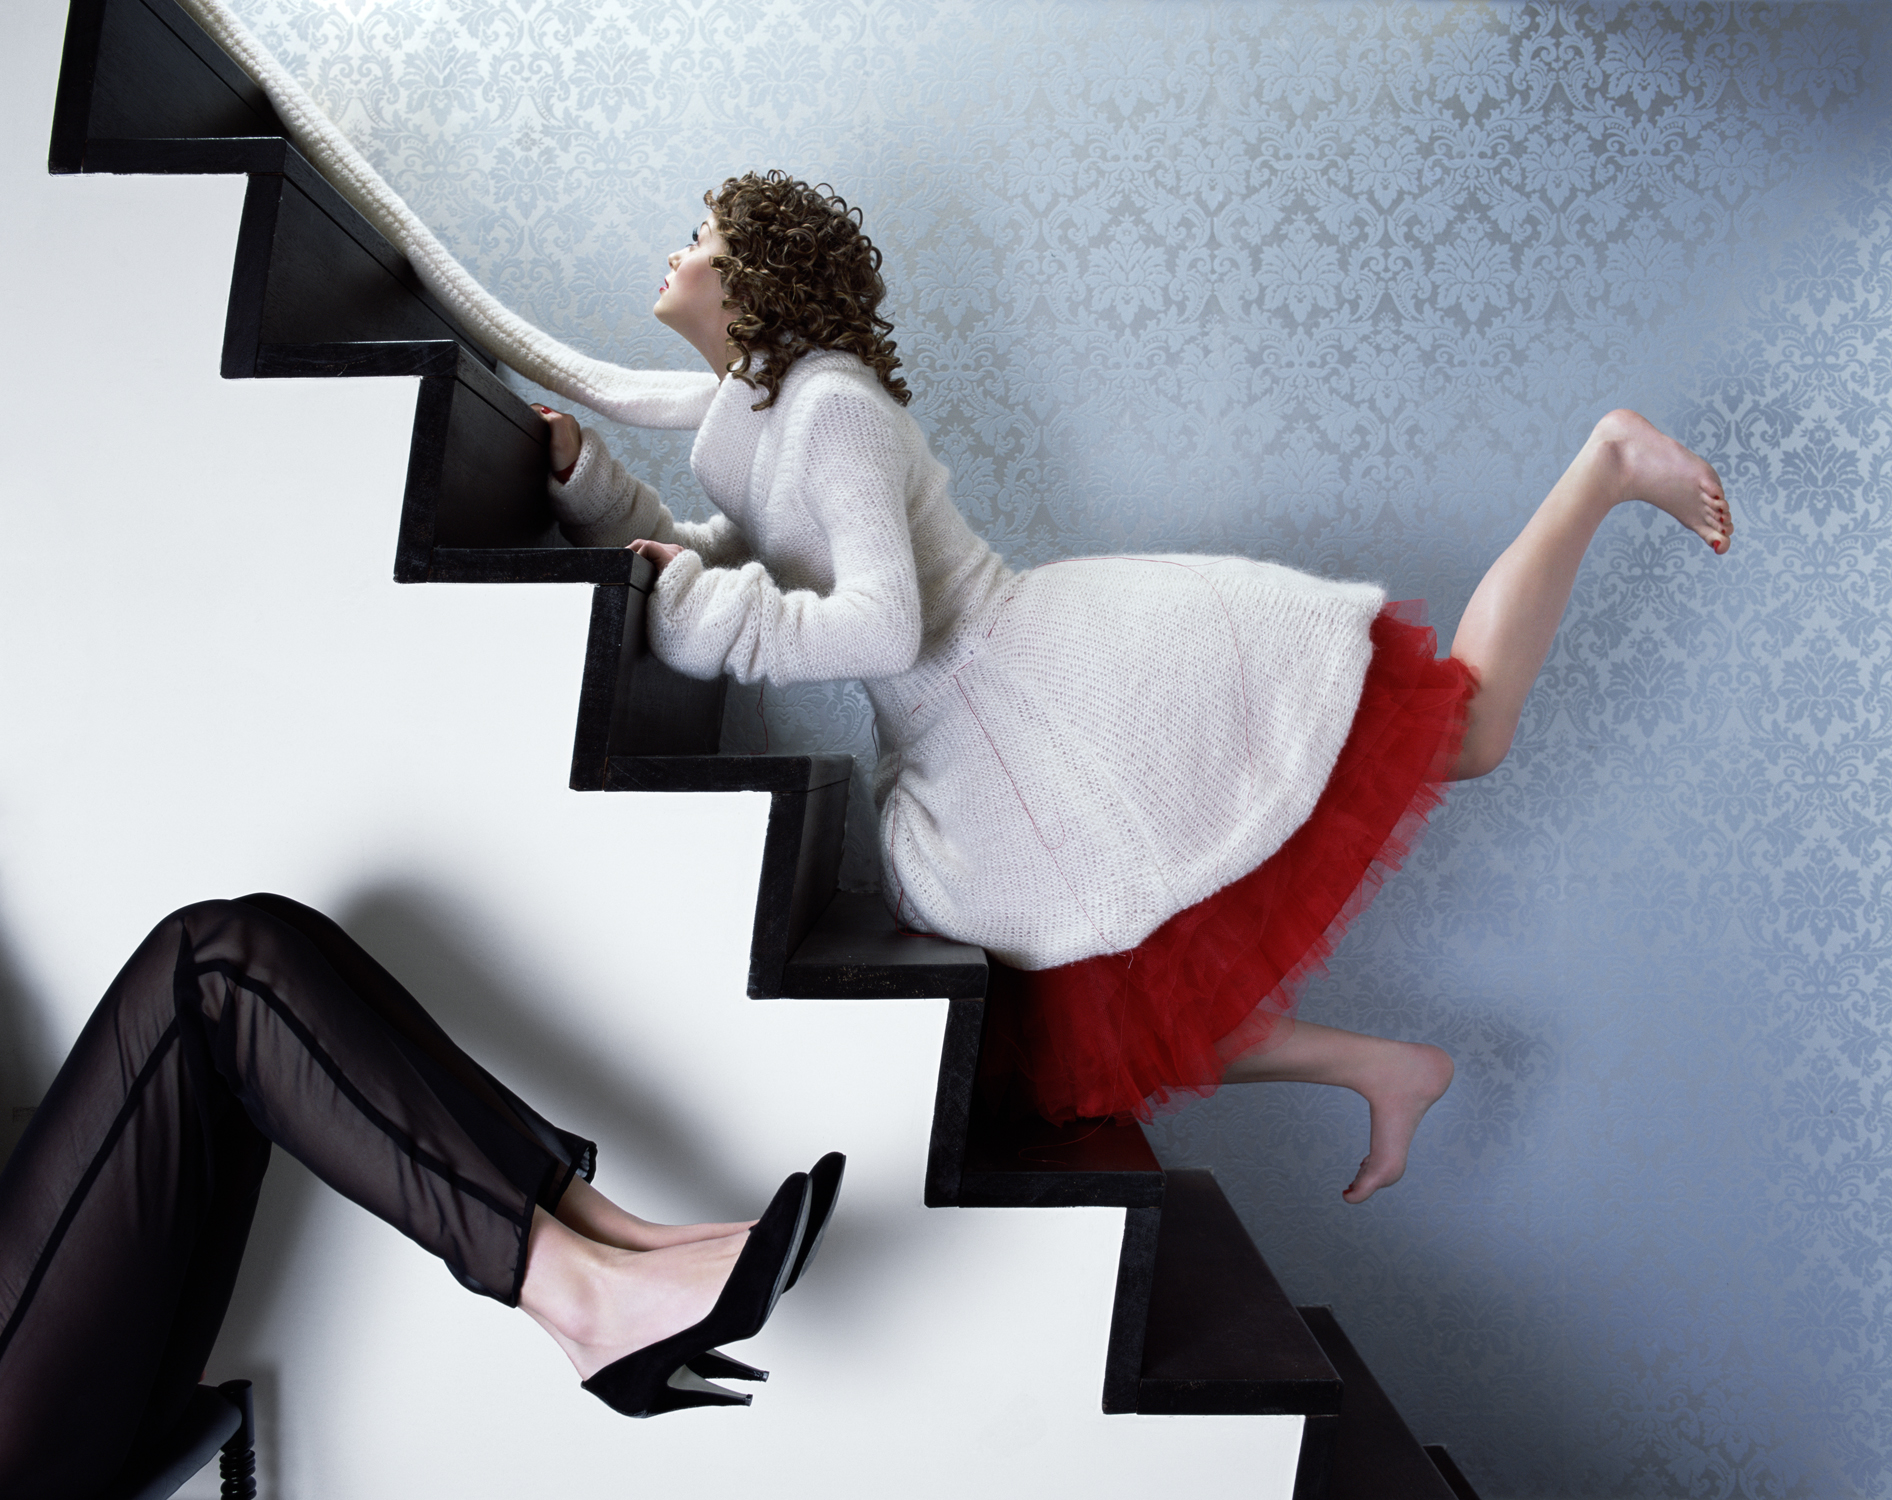 FluentFight 1 Zoe Images The Stairs Flore Zoe part of opera gallery collection Marcel Wanders Studio 